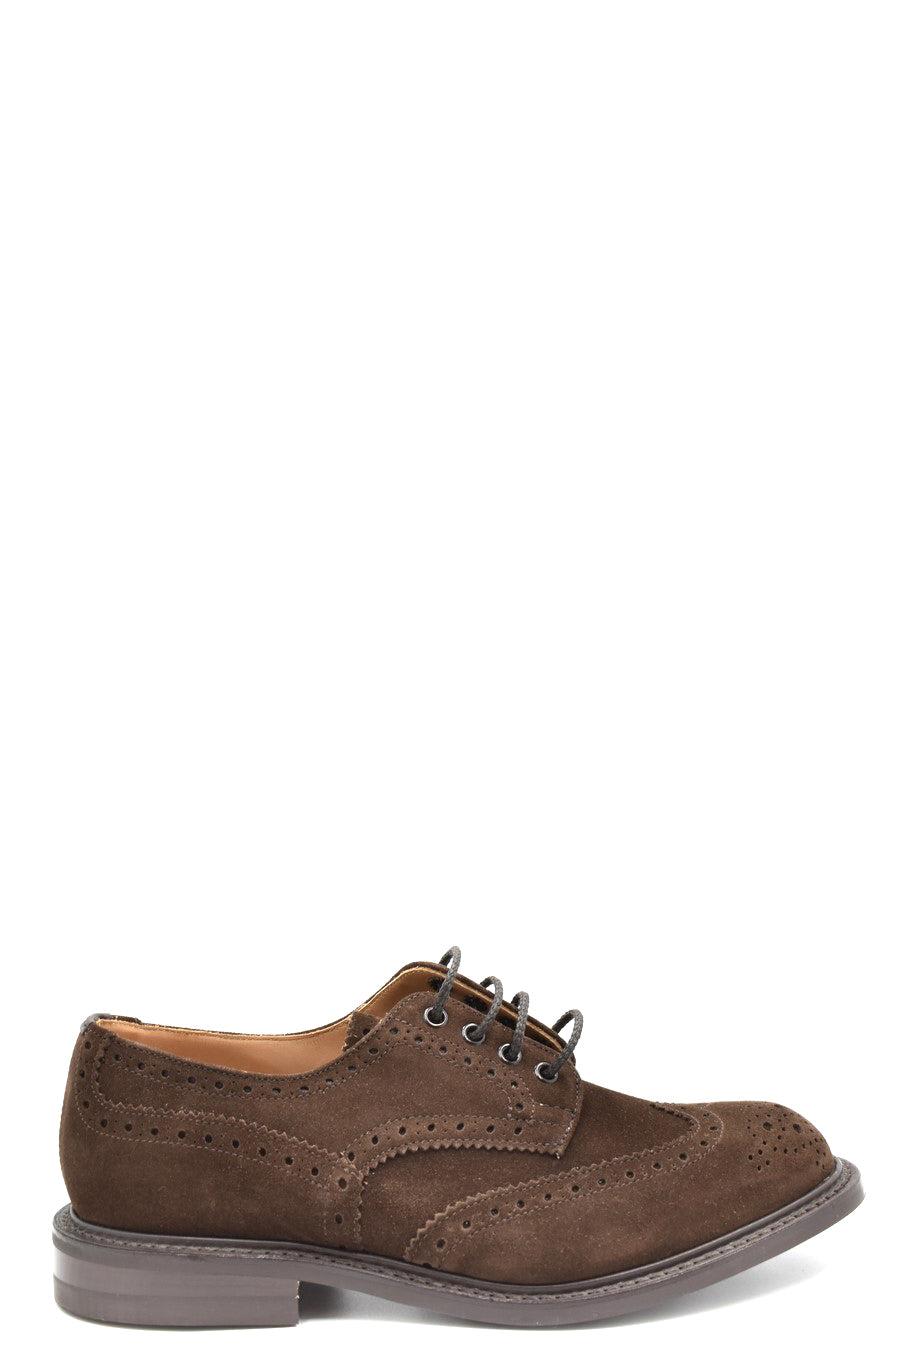 Tricker's Bourton Country Shoes